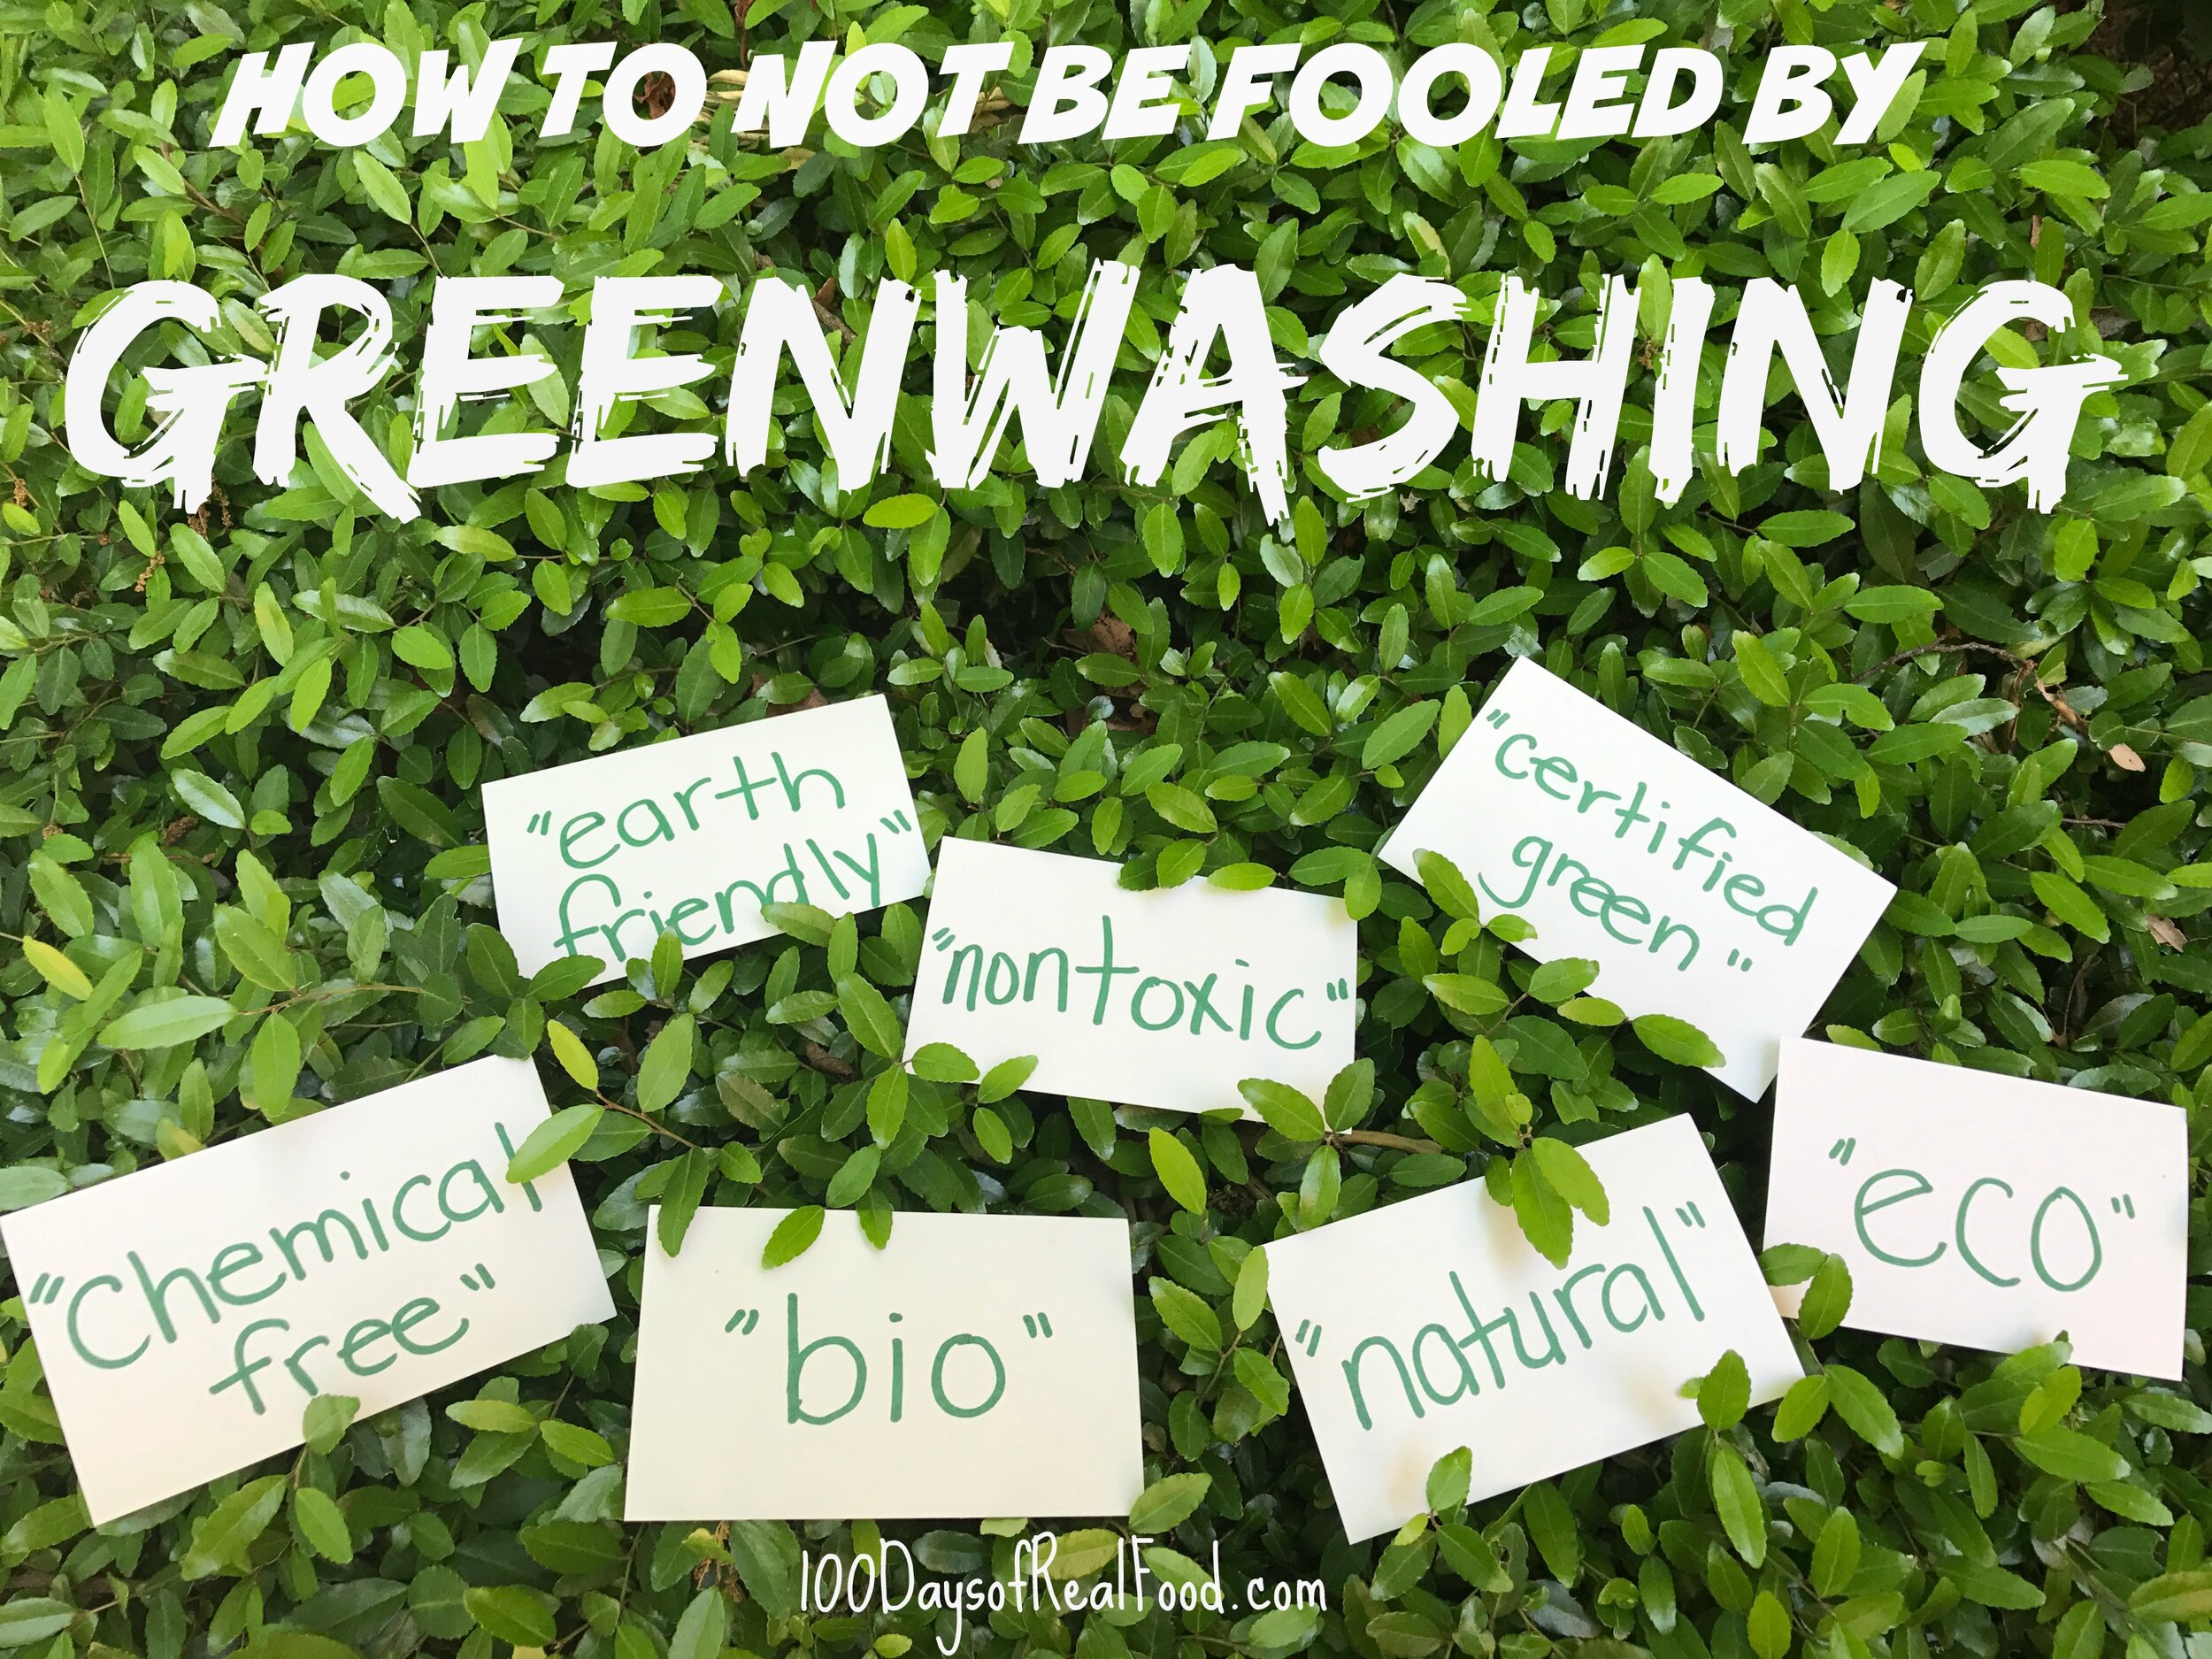 What are the disadvantages of green business?